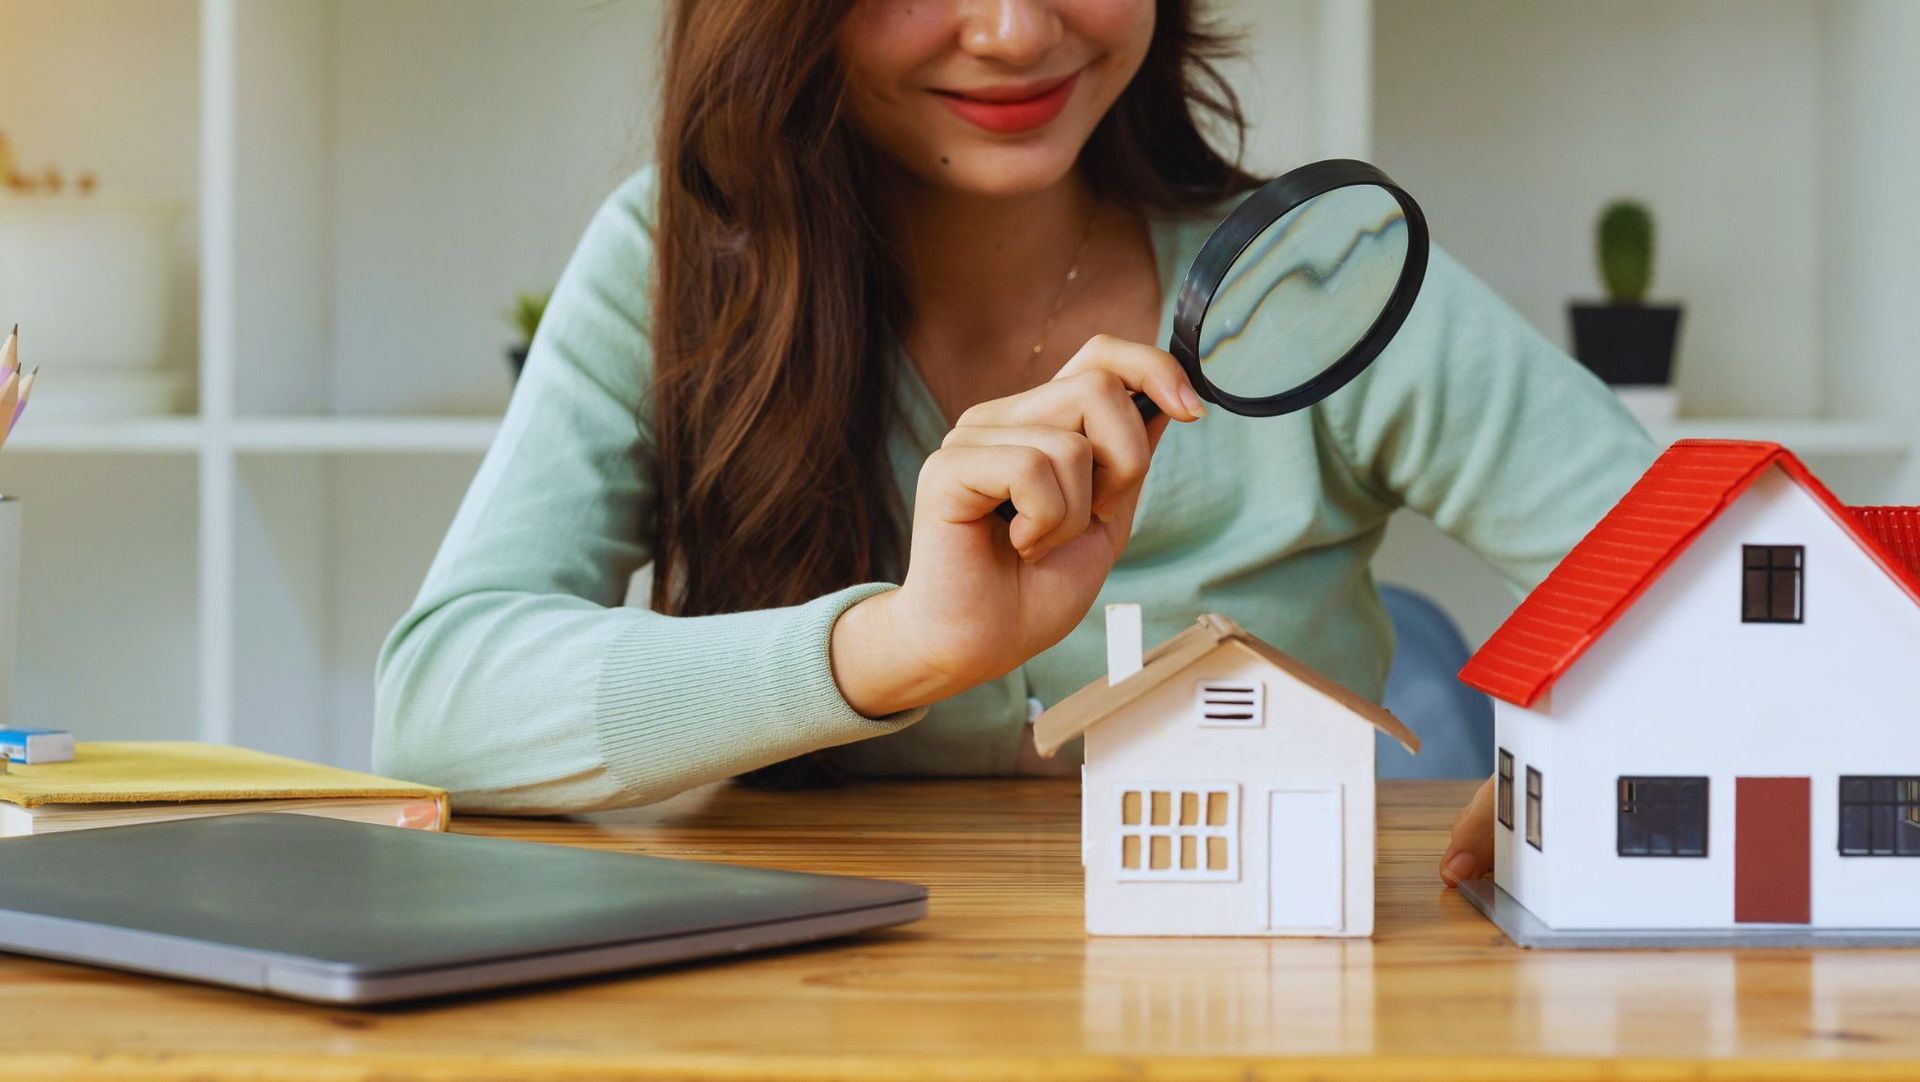 A woman looking at a rental house with a magnifying glass.